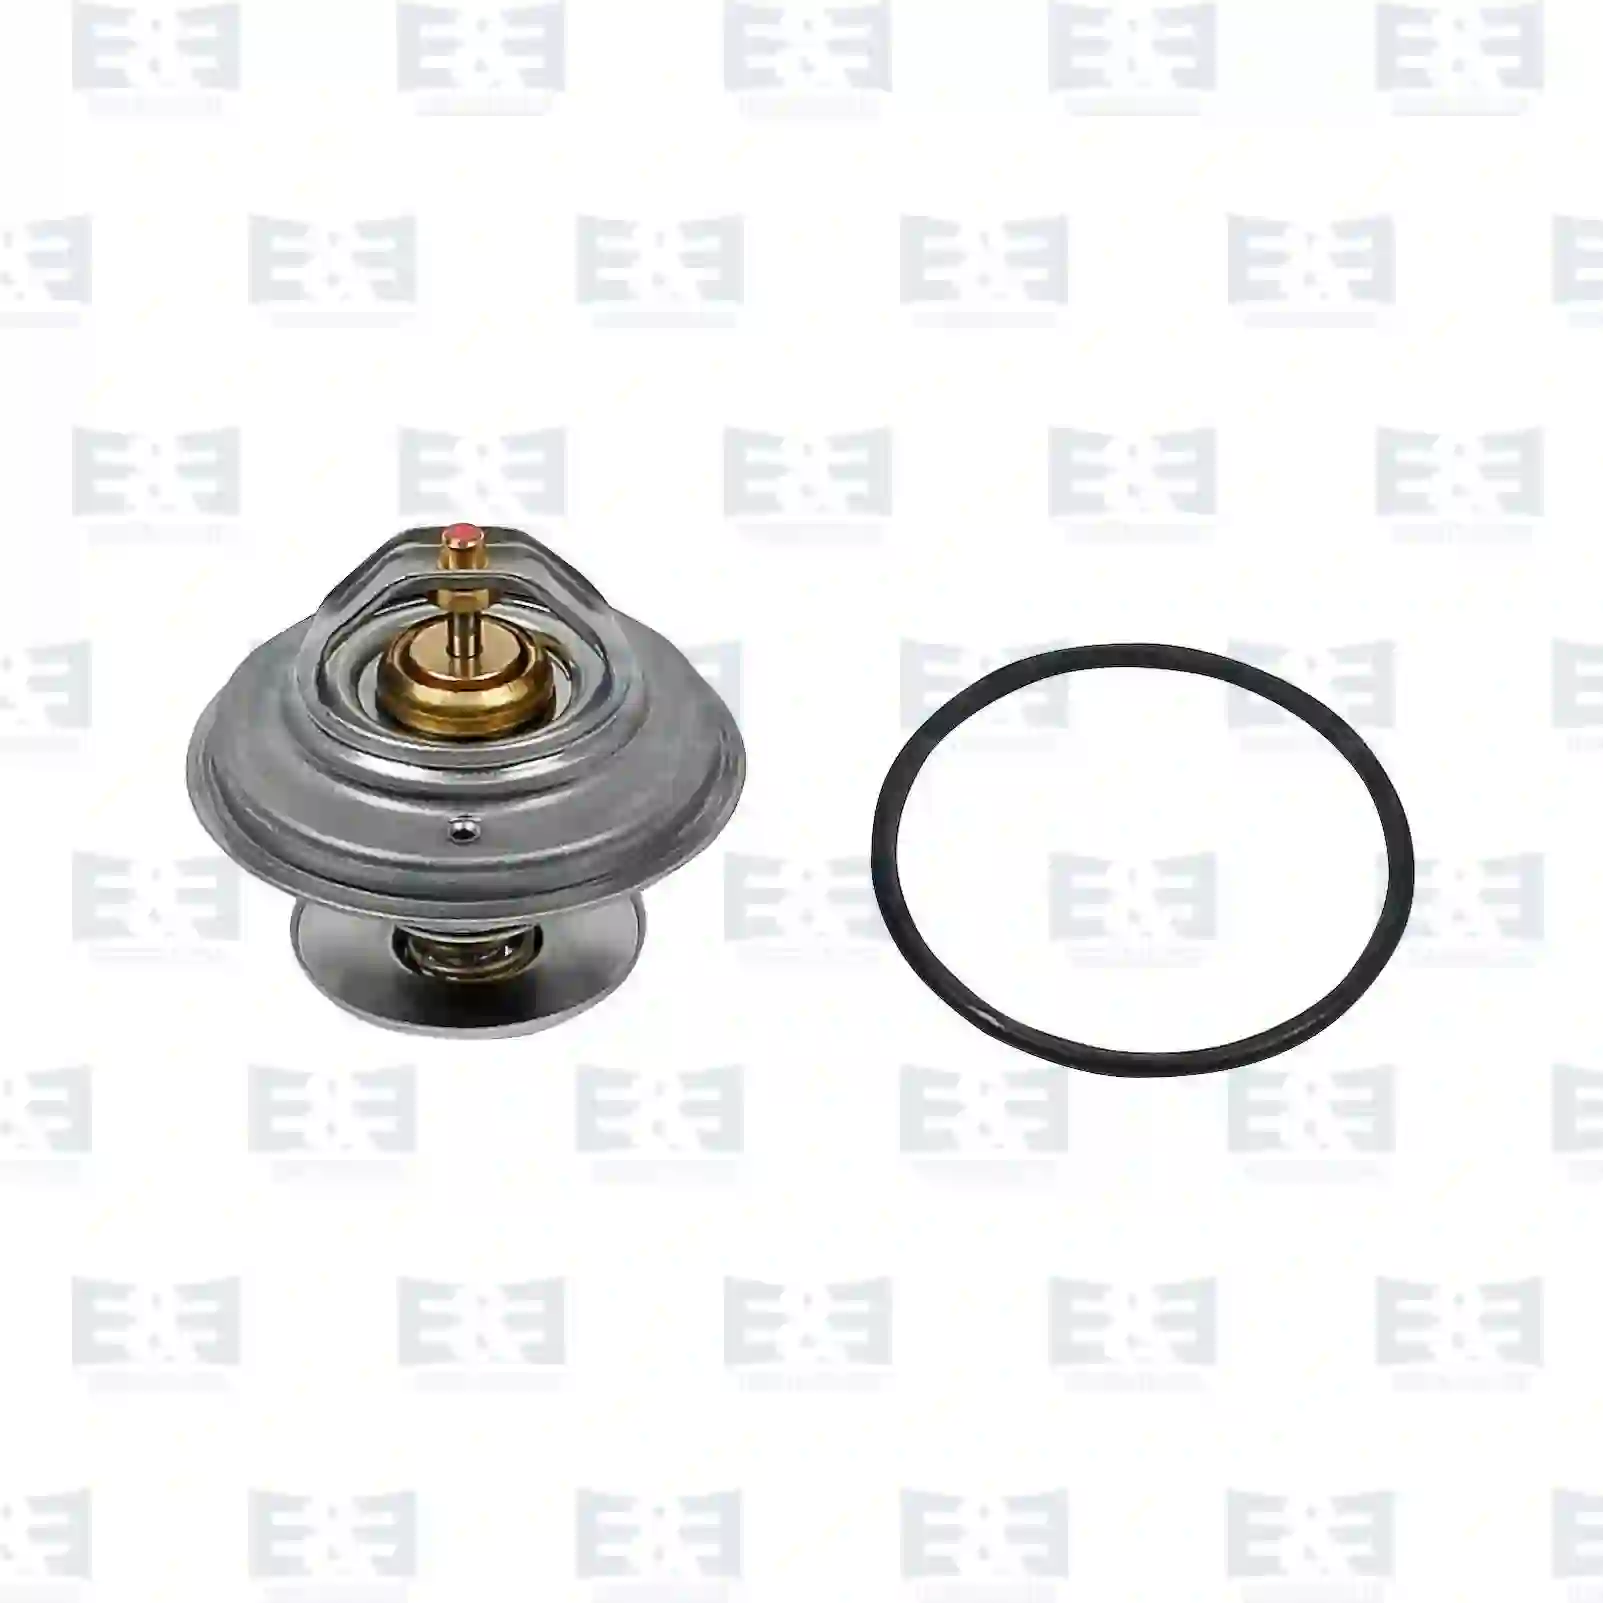 Thermostat Thermostat, EE No 2E2203024 ,  oem no:133734, 1102000515, 1112000515, 04224846, 22037675, 22037676, 46130346, 0012036875, 0012039175, 0022037676, 0022038175, 0032038175, 0110200515, 1002000515, 1022000215, 1022000315, 1022001415, 1022001515, 1022001815, 1022001915, 1022030373, 1102000111, 1102000415, 1102000515, 1112000515, 133734, 7700703136, 0022037675, 1102000515, 1112000515, 1622033075, 273480, 2734804, 3273480 E&E Truck Spare Parts | Truck Spare Parts, Auotomotive Spare Parts